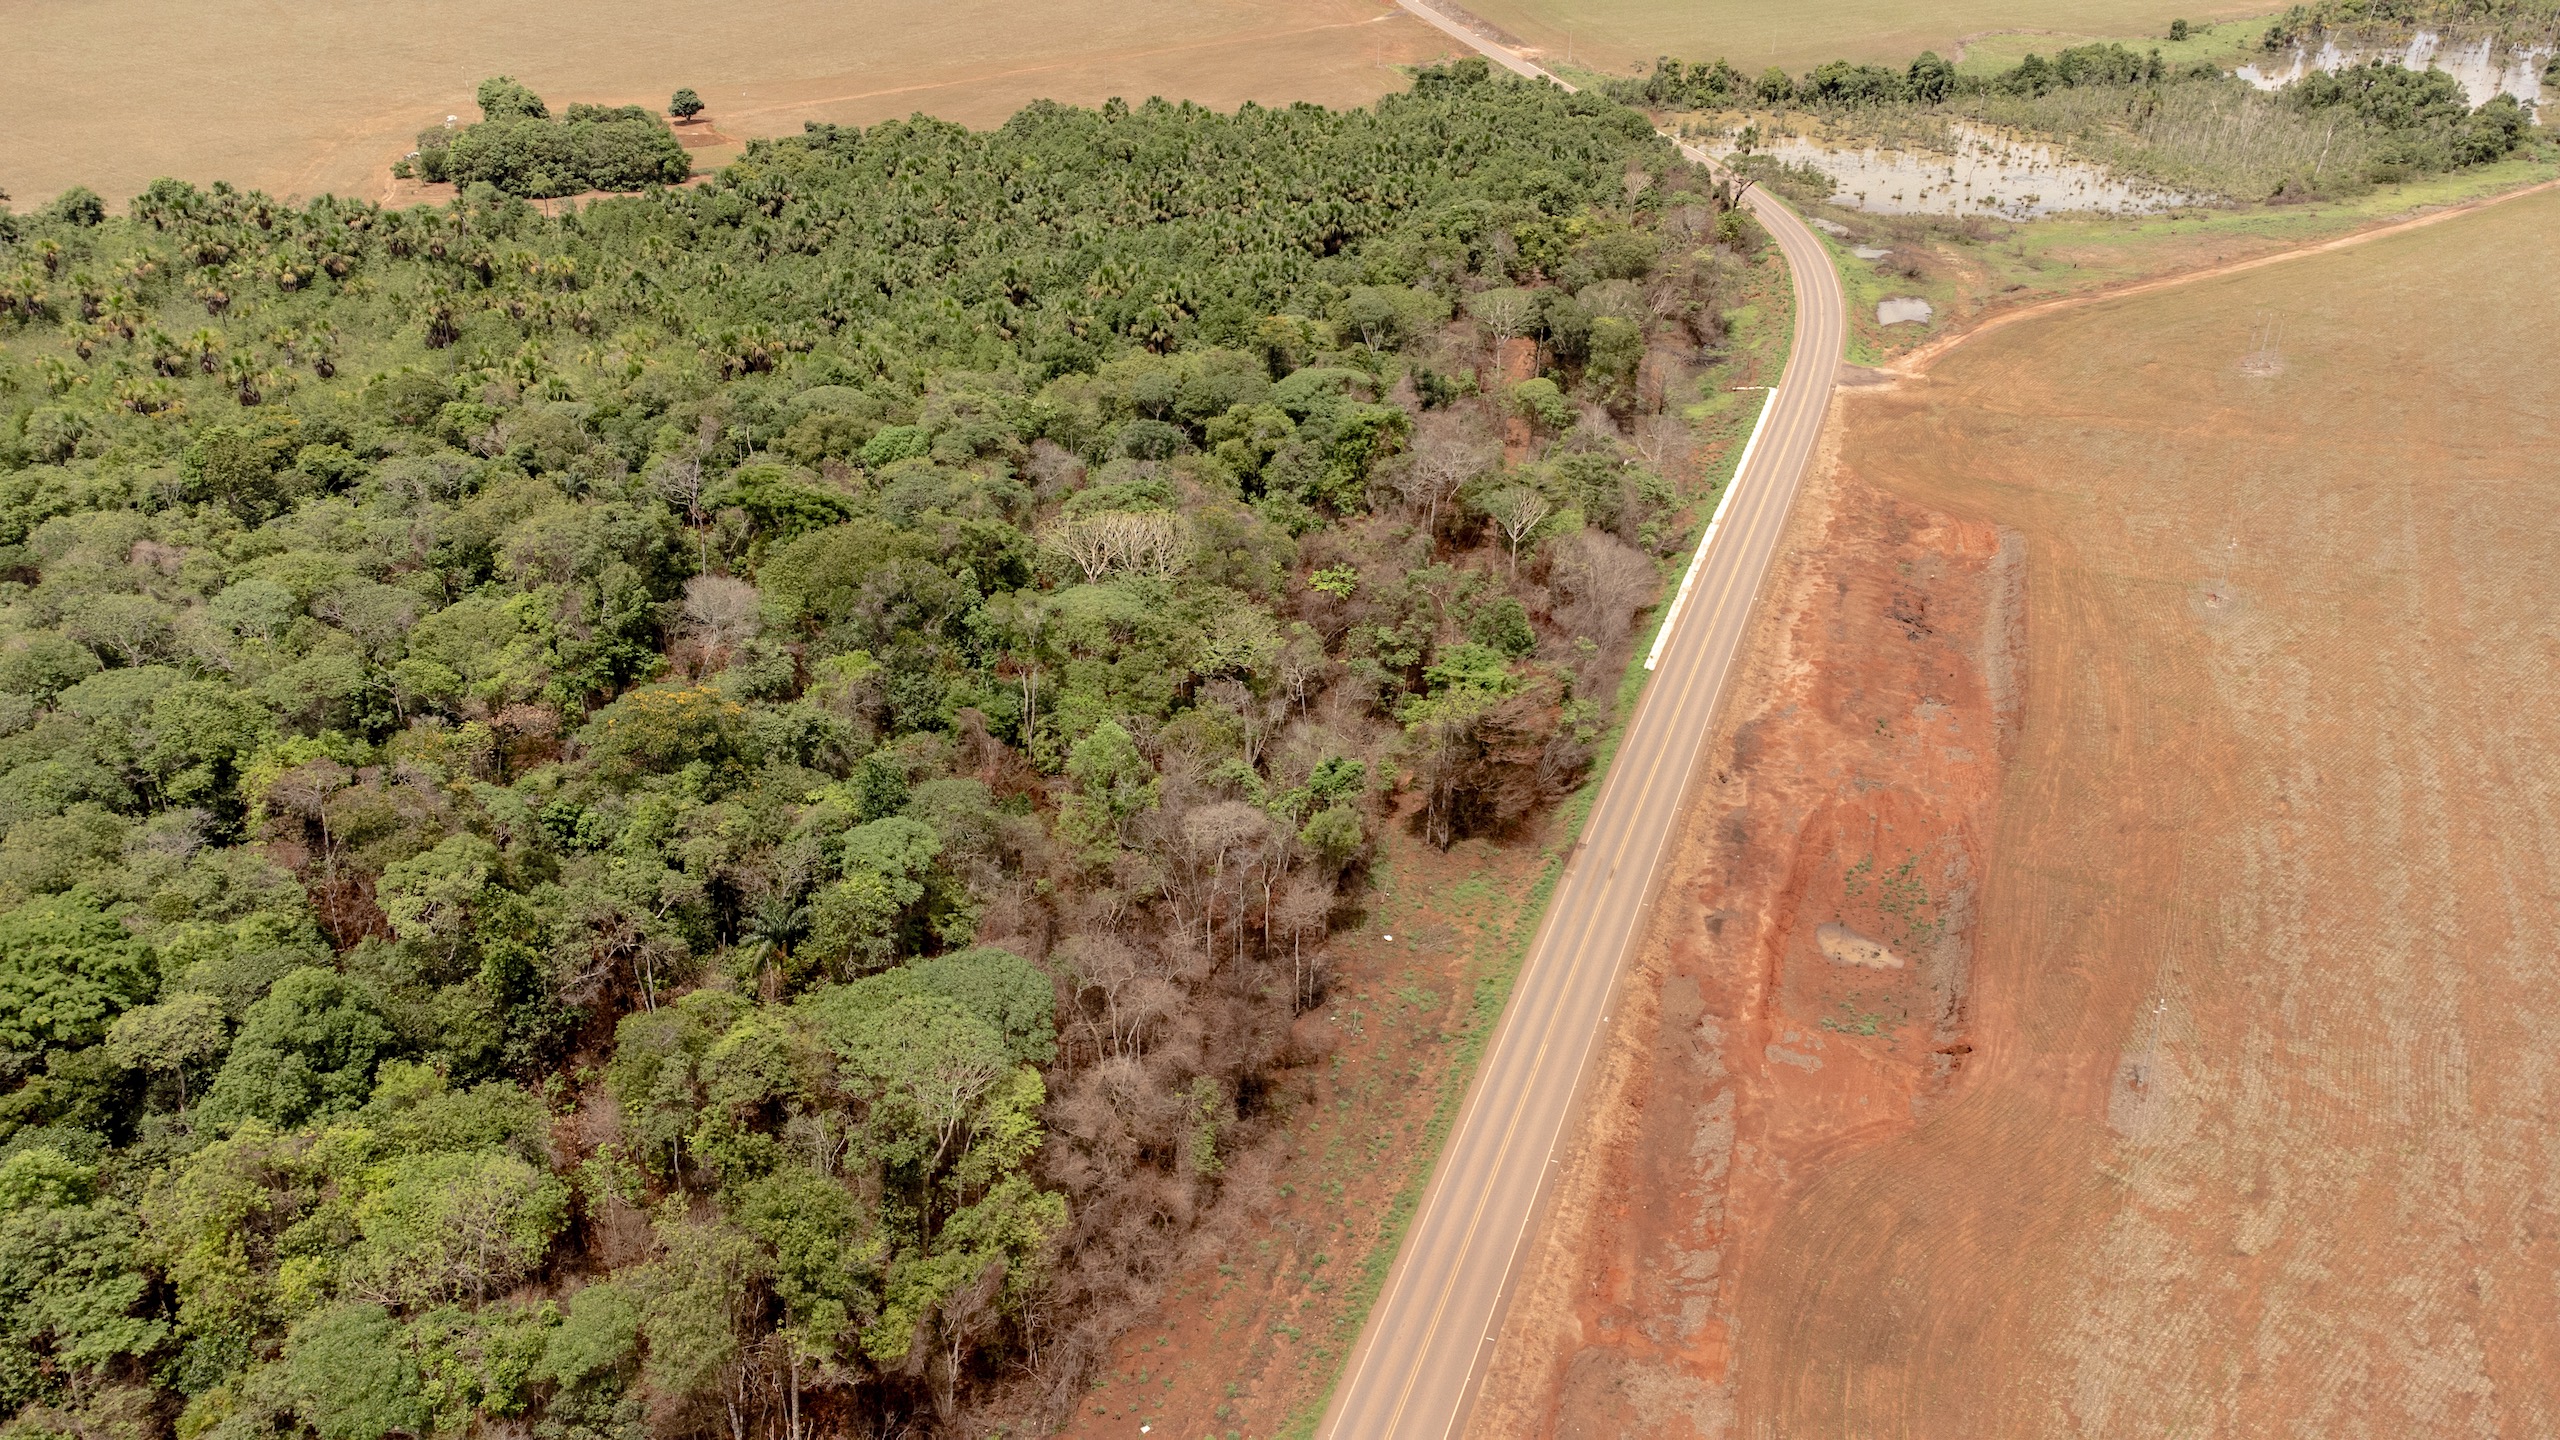 <p>Deforested field for soybean plantation in Querência, Mato Grosso state, Brazil. The country is currently the biggest supplier of soybeans to China, which is putting pressure on its forests. (Image: Flávia Milhorance / Dialogue Earth)</p>